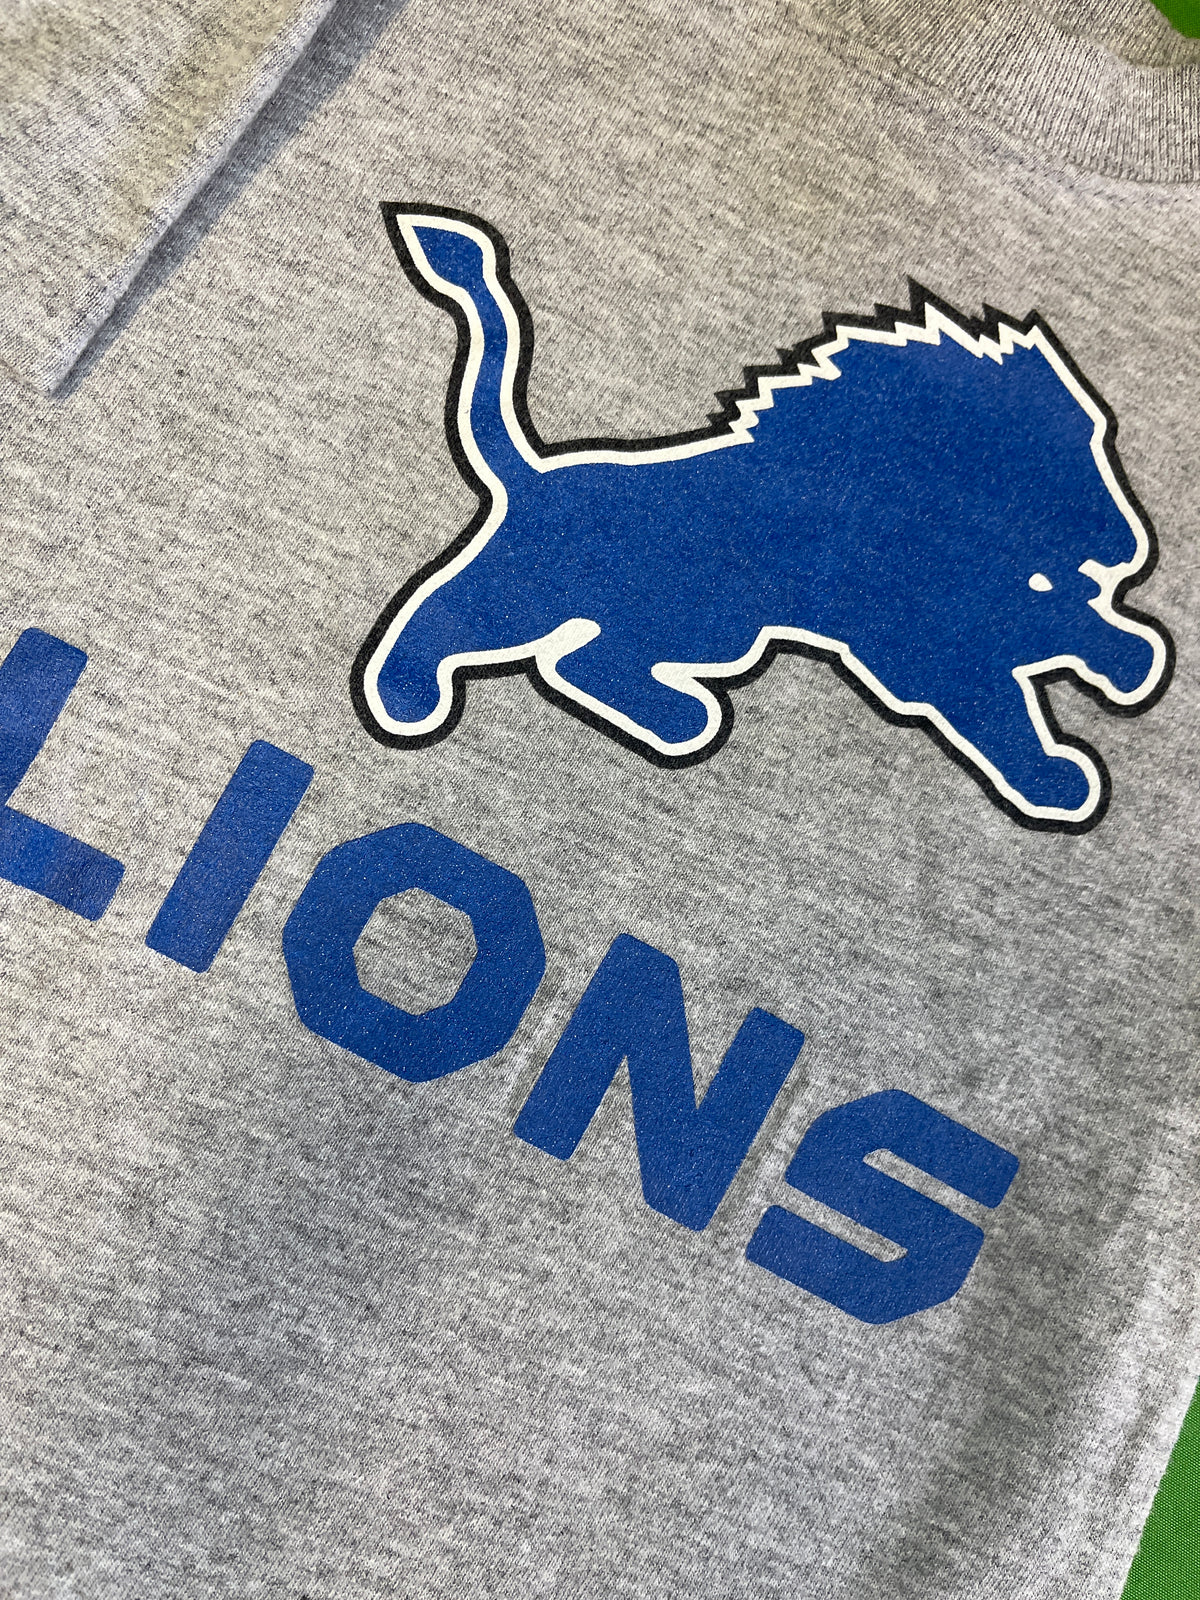 NFL Detroit Lions Heathered Grey T-Shirt Toddler 2T